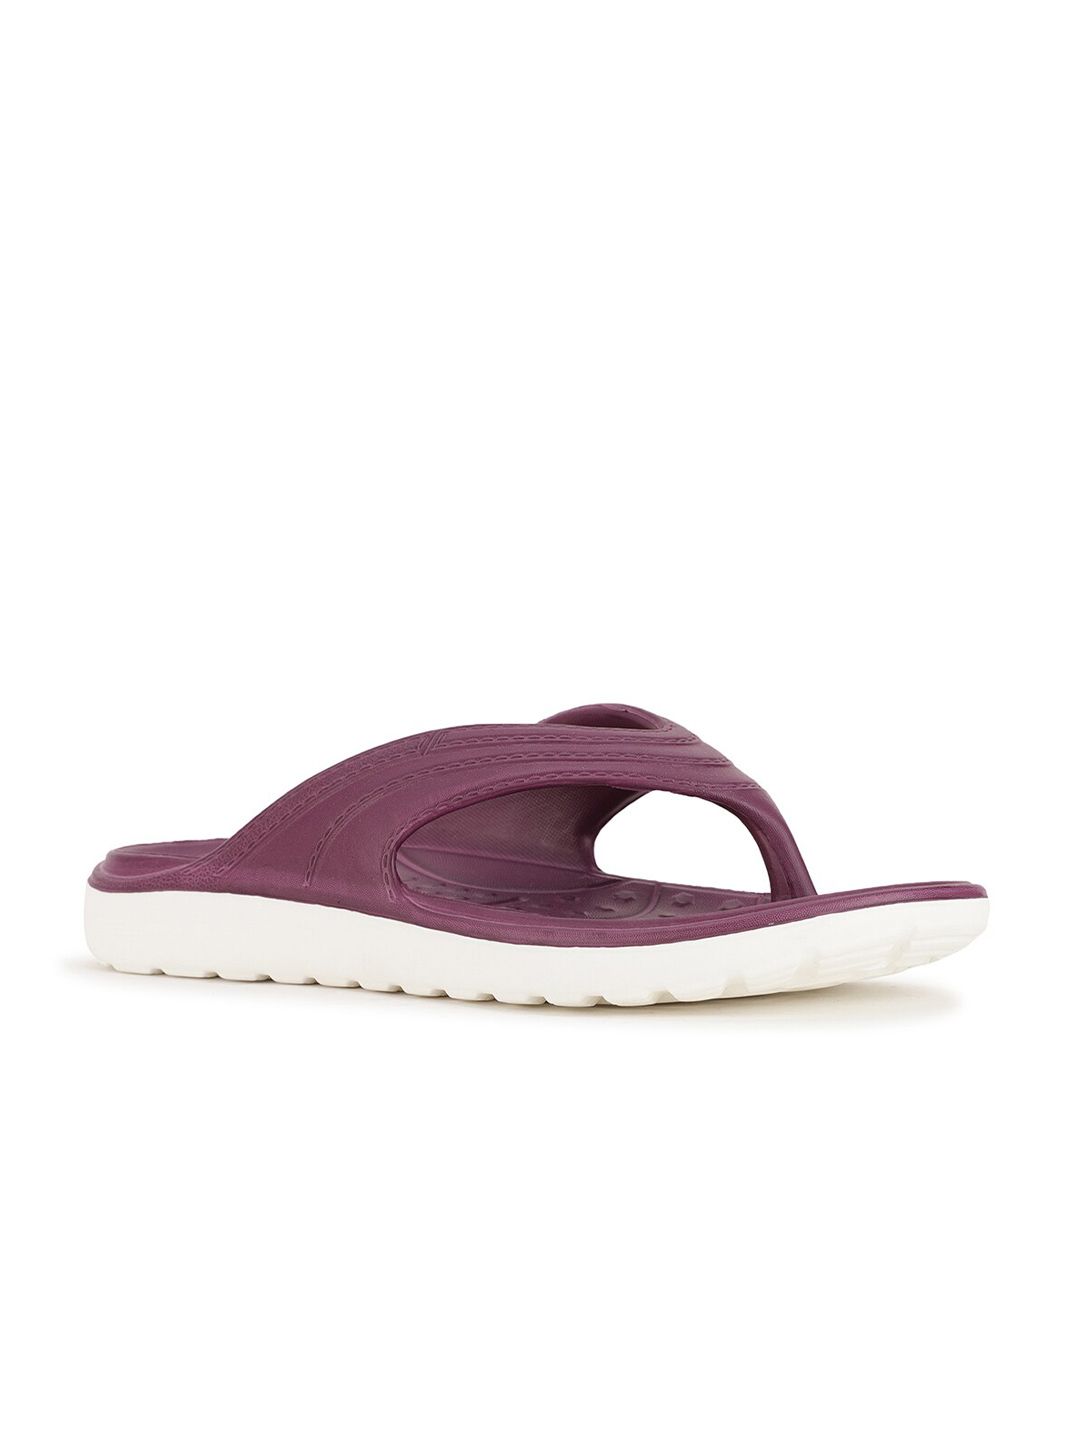 Bata Women Red Room Slippers Price in India